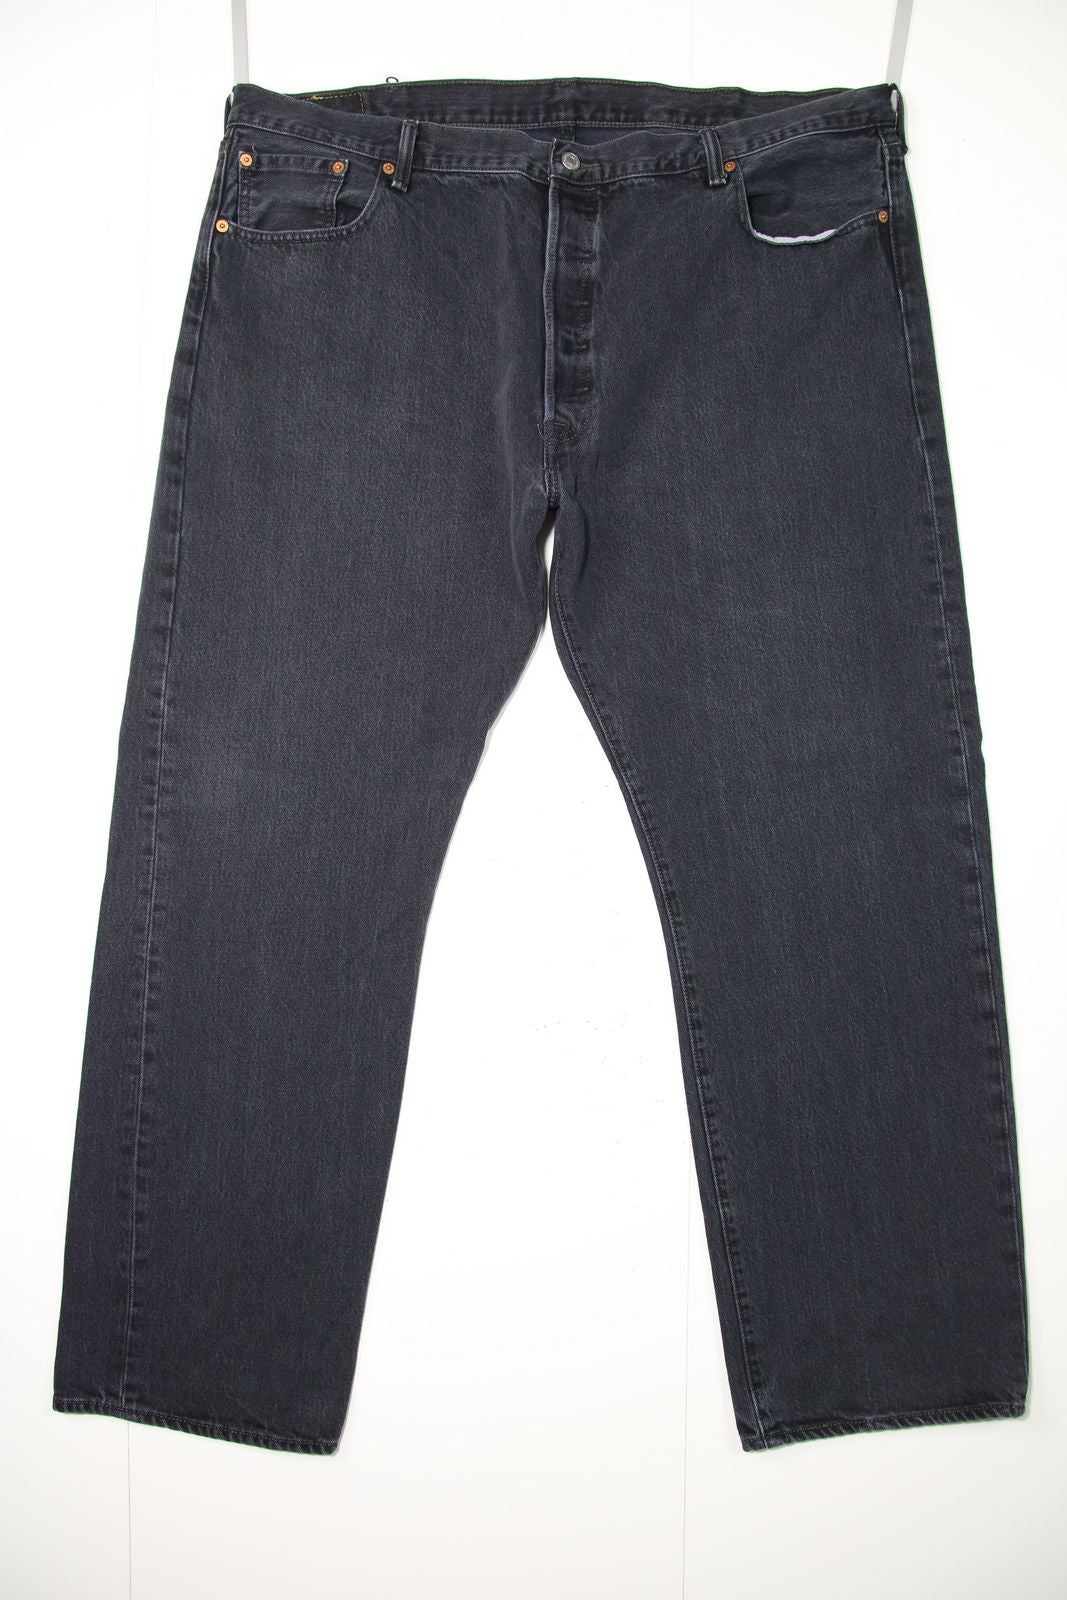 Levi's Straight Fit Nero Denim W40 L32 Jeans Vintage Made in USA